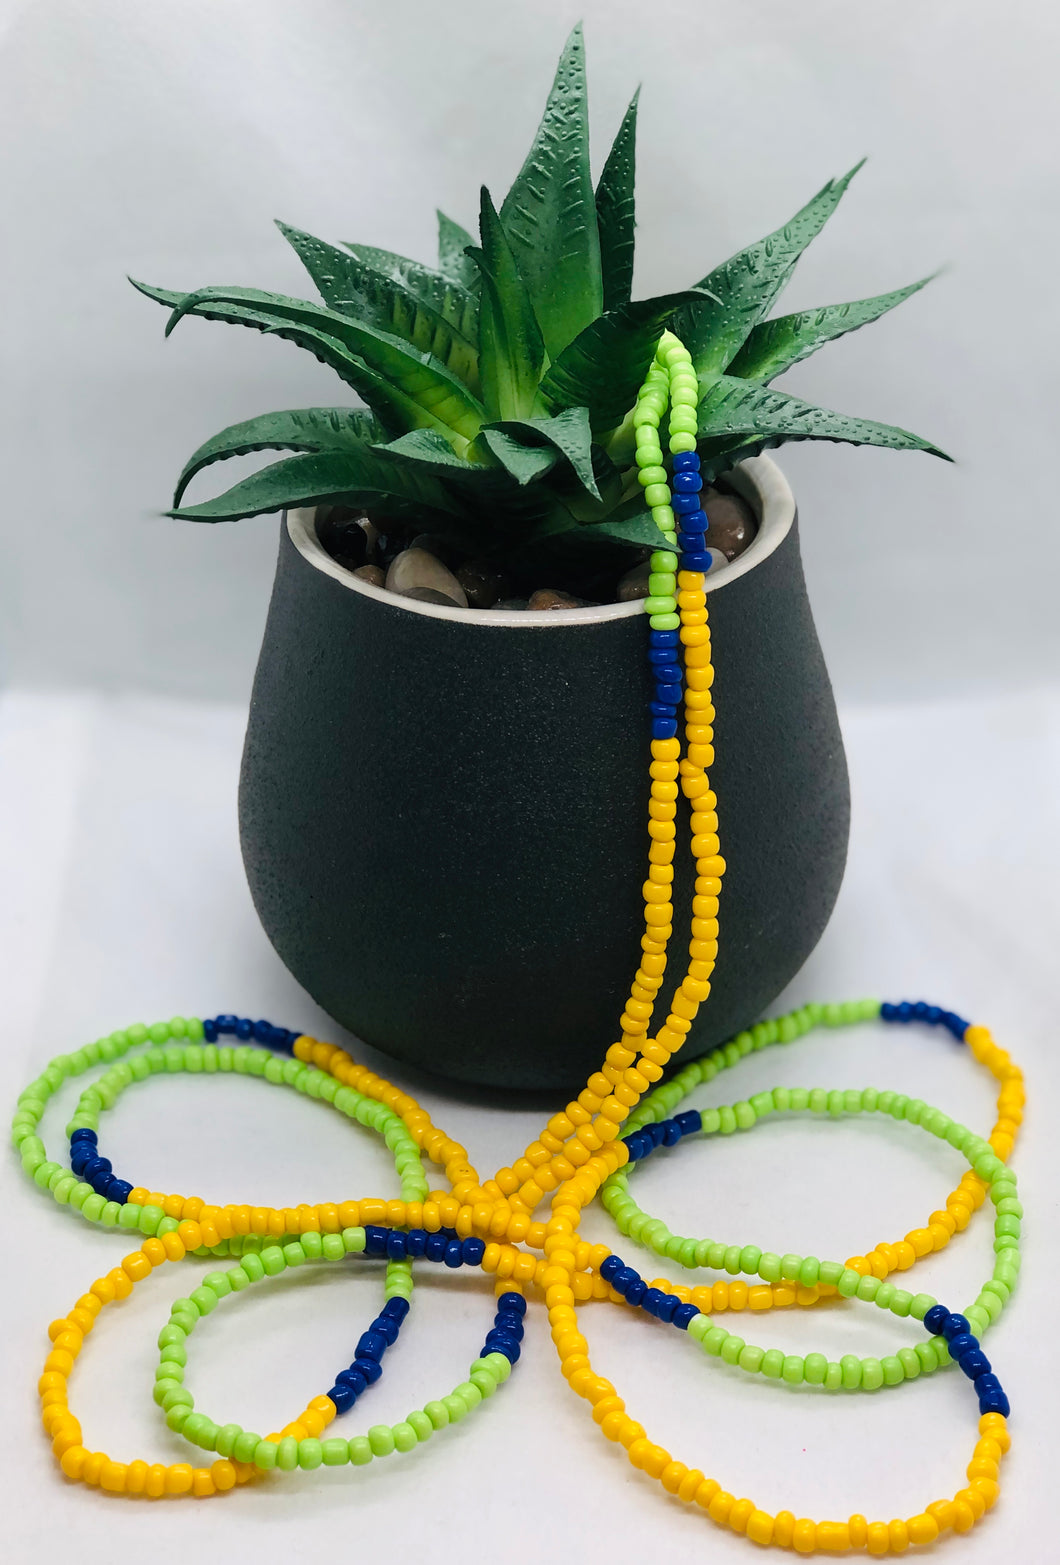 “ Letting Go”Waist Beads with clasps Blue, Green and Yellow  Beads